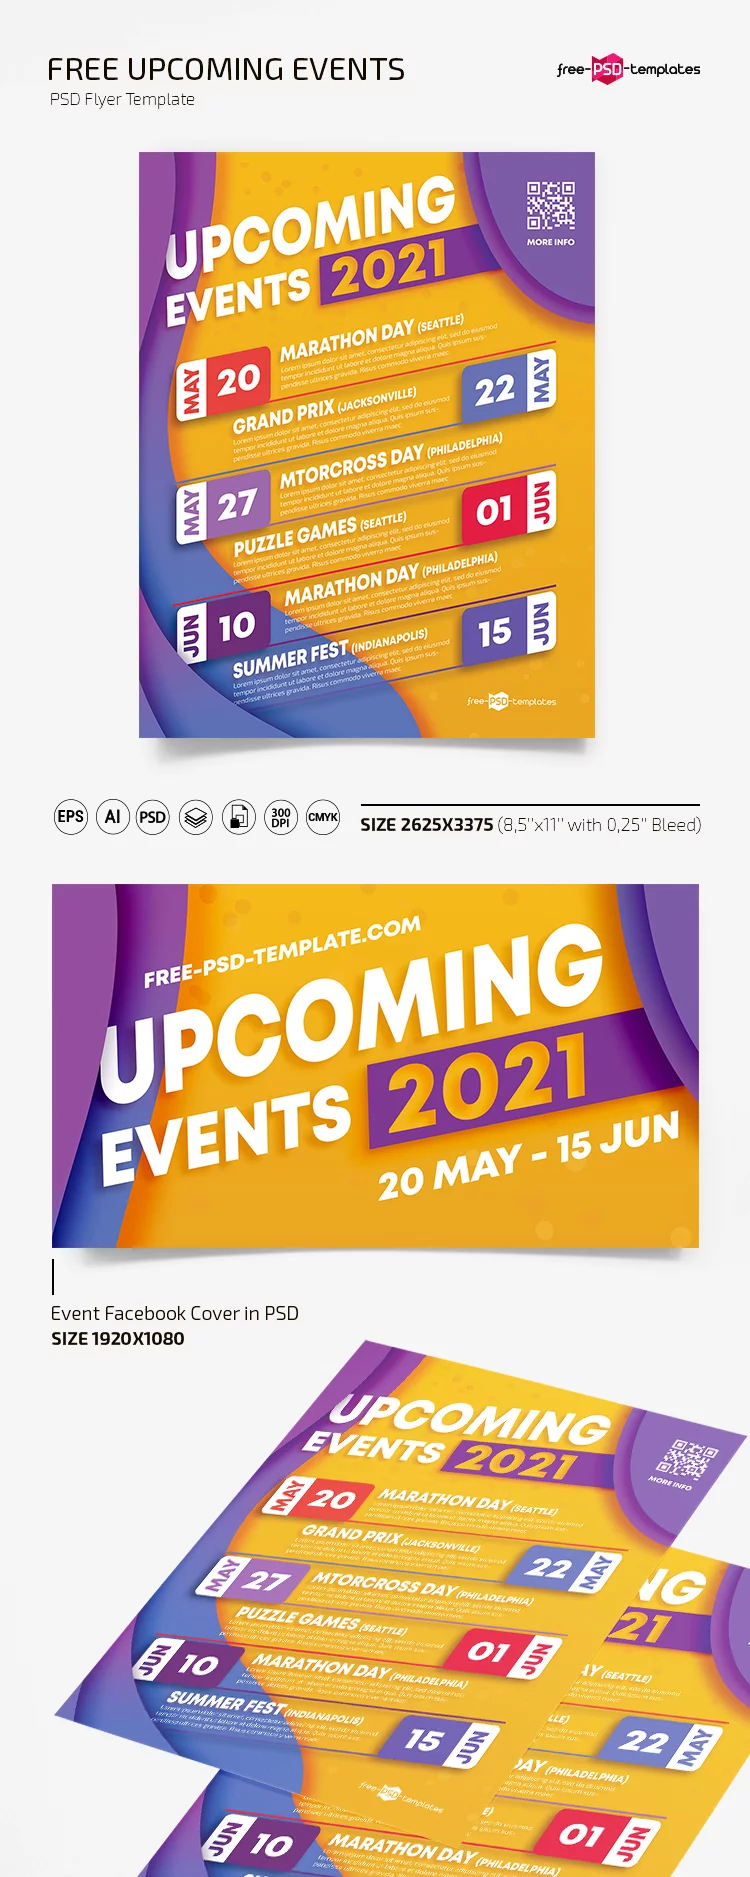 Free Upcoming Events Flyer Template in PSD + AI